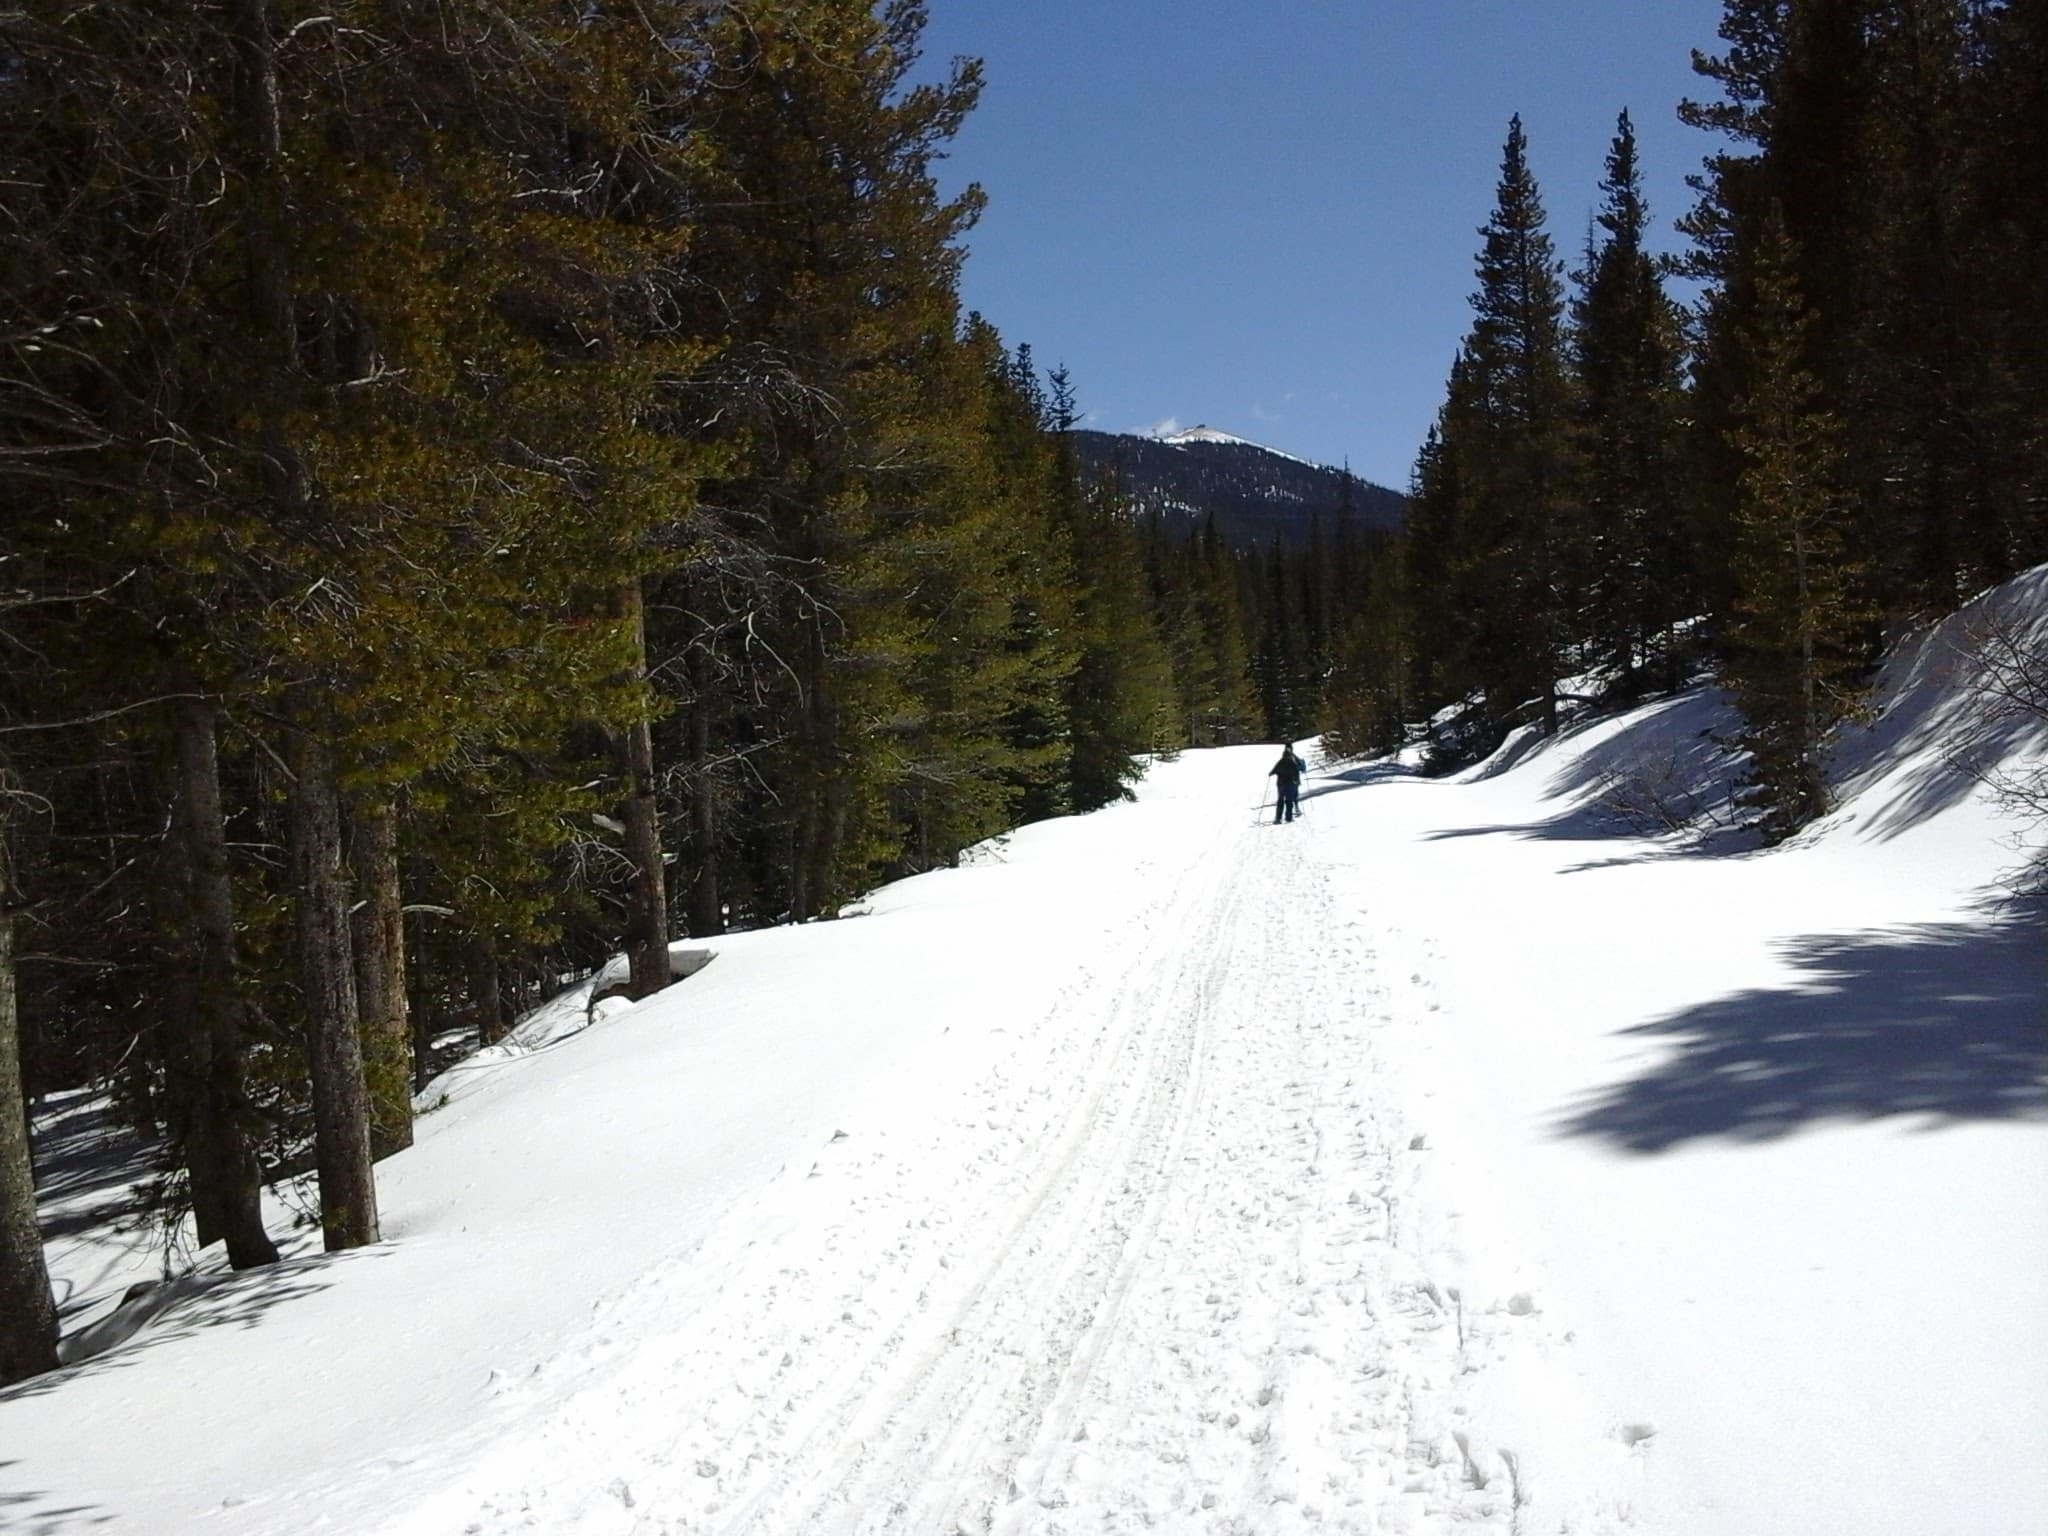 Cross Country skiier on a road in the Rocky Mountains on a sunny day with trees all around. 